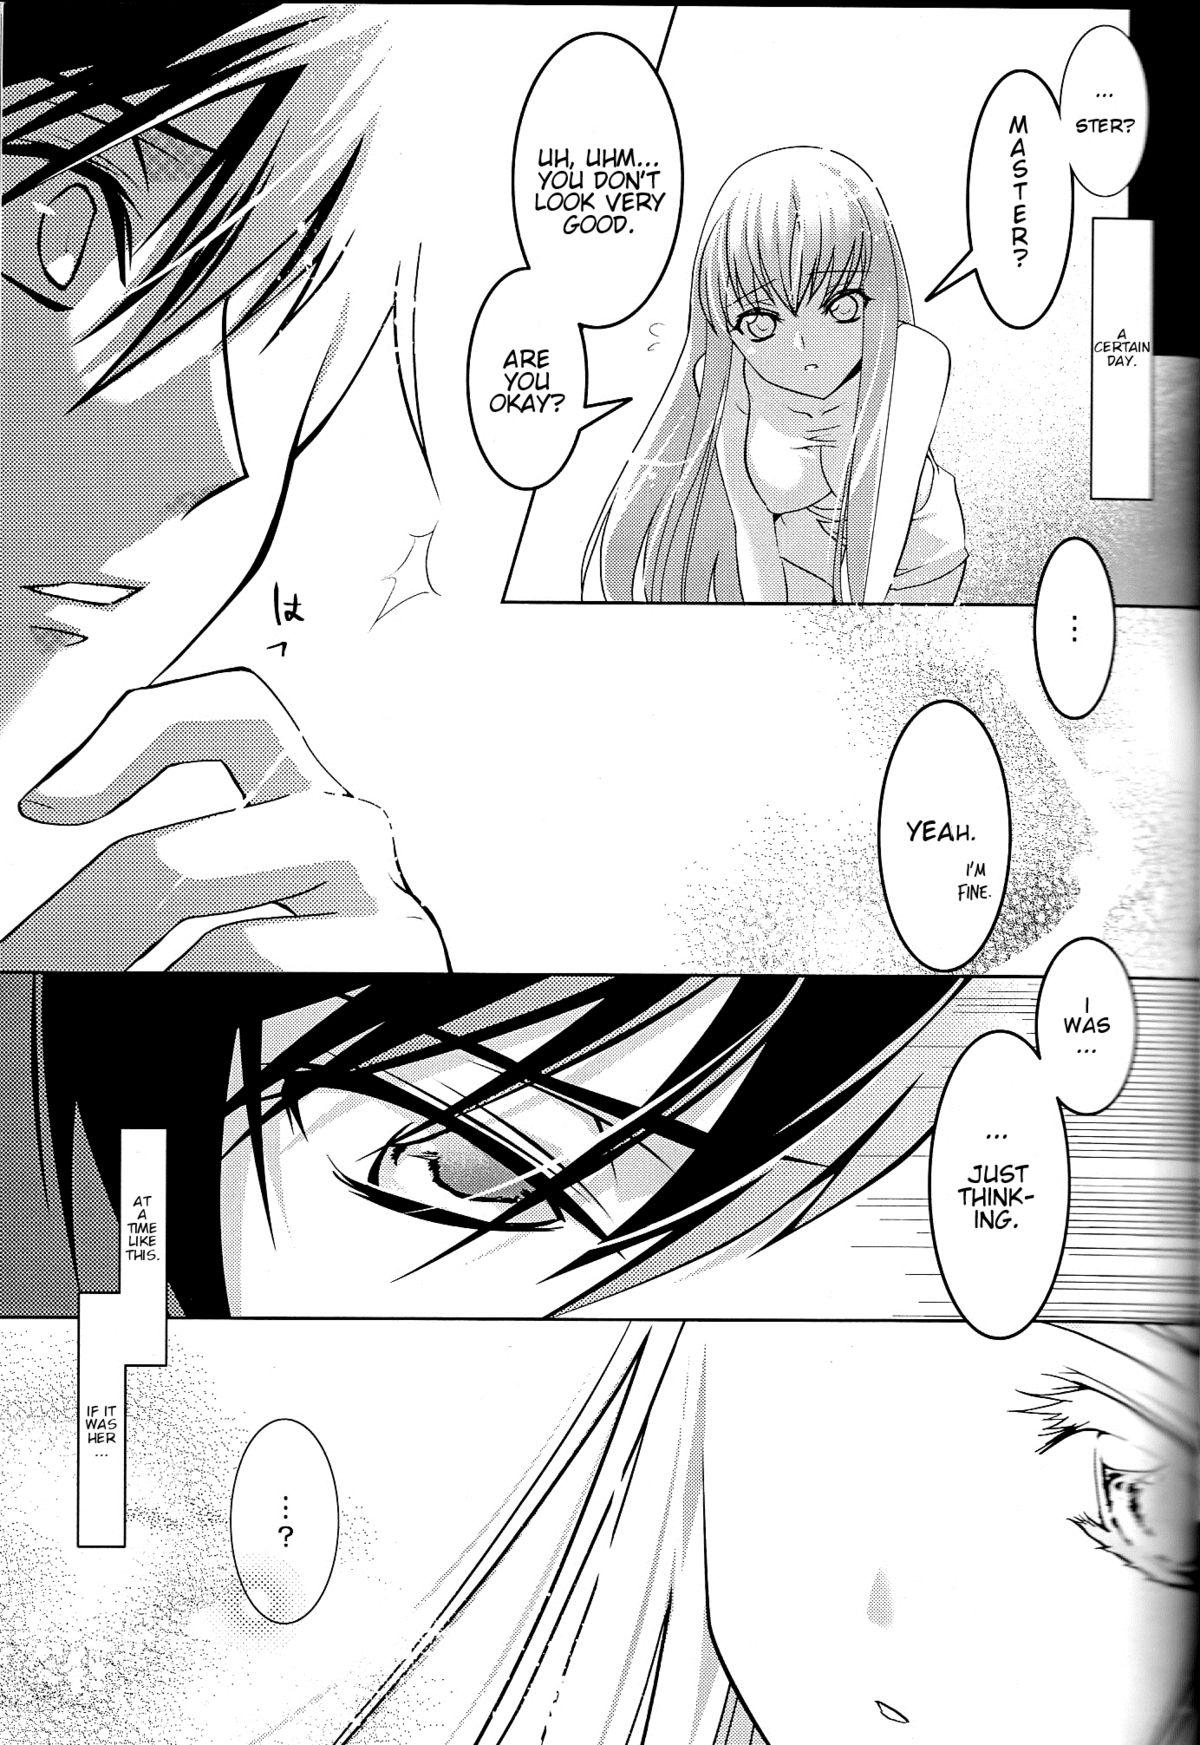 Three Some BLACKNOISE - Code geass Chibola - Page 8